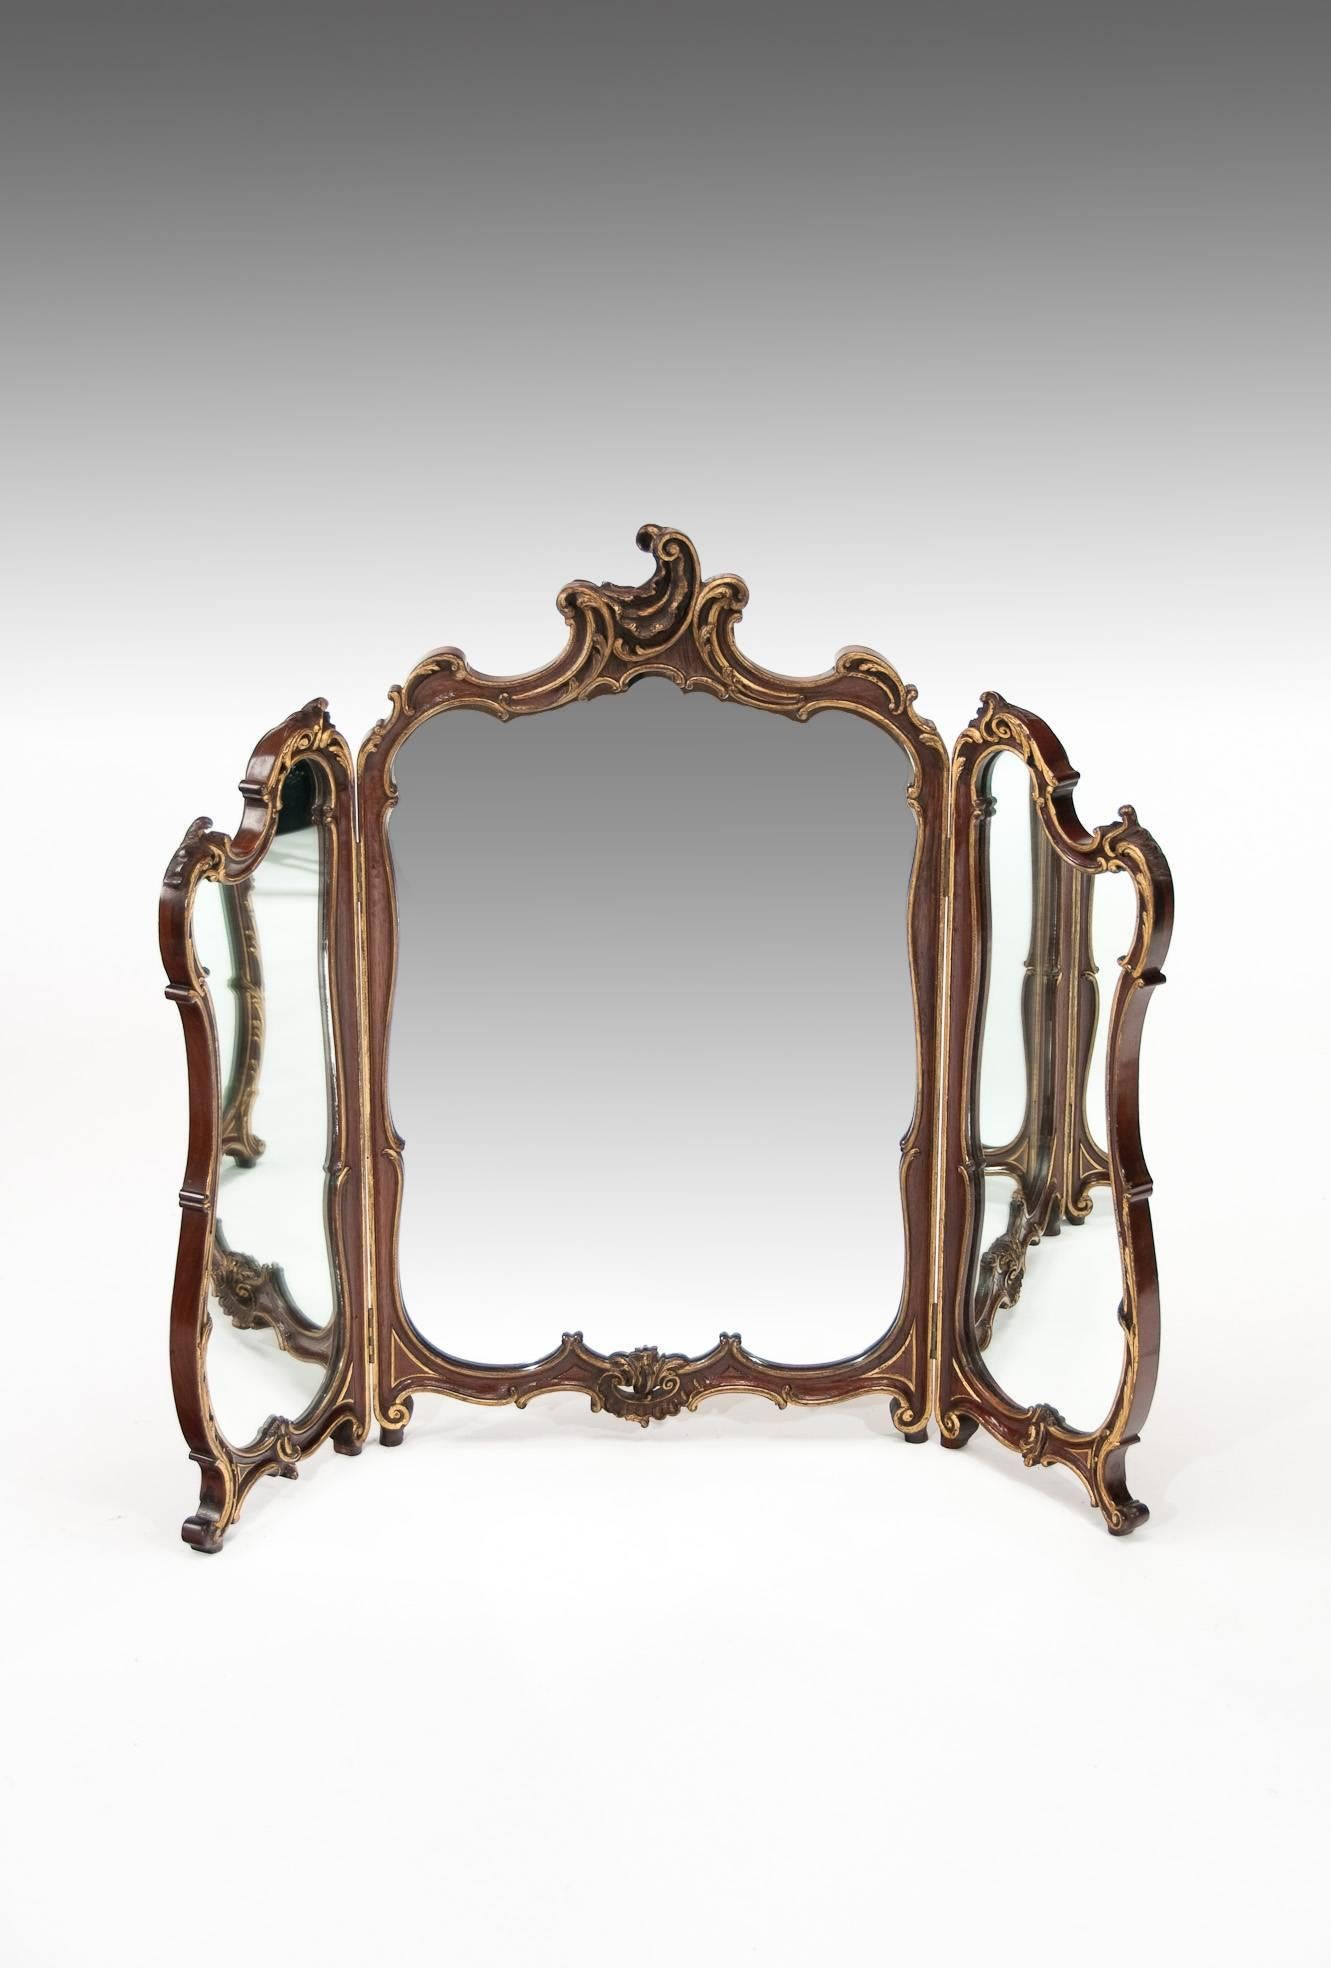 A quality antique mahogany and gilt triptych dressing table mirror. 
This well carved triptych hinged dressing mirror having a Rococo design is extremely well made dating to circa 1880-1900. 
Of superior form and in excellent condition having had